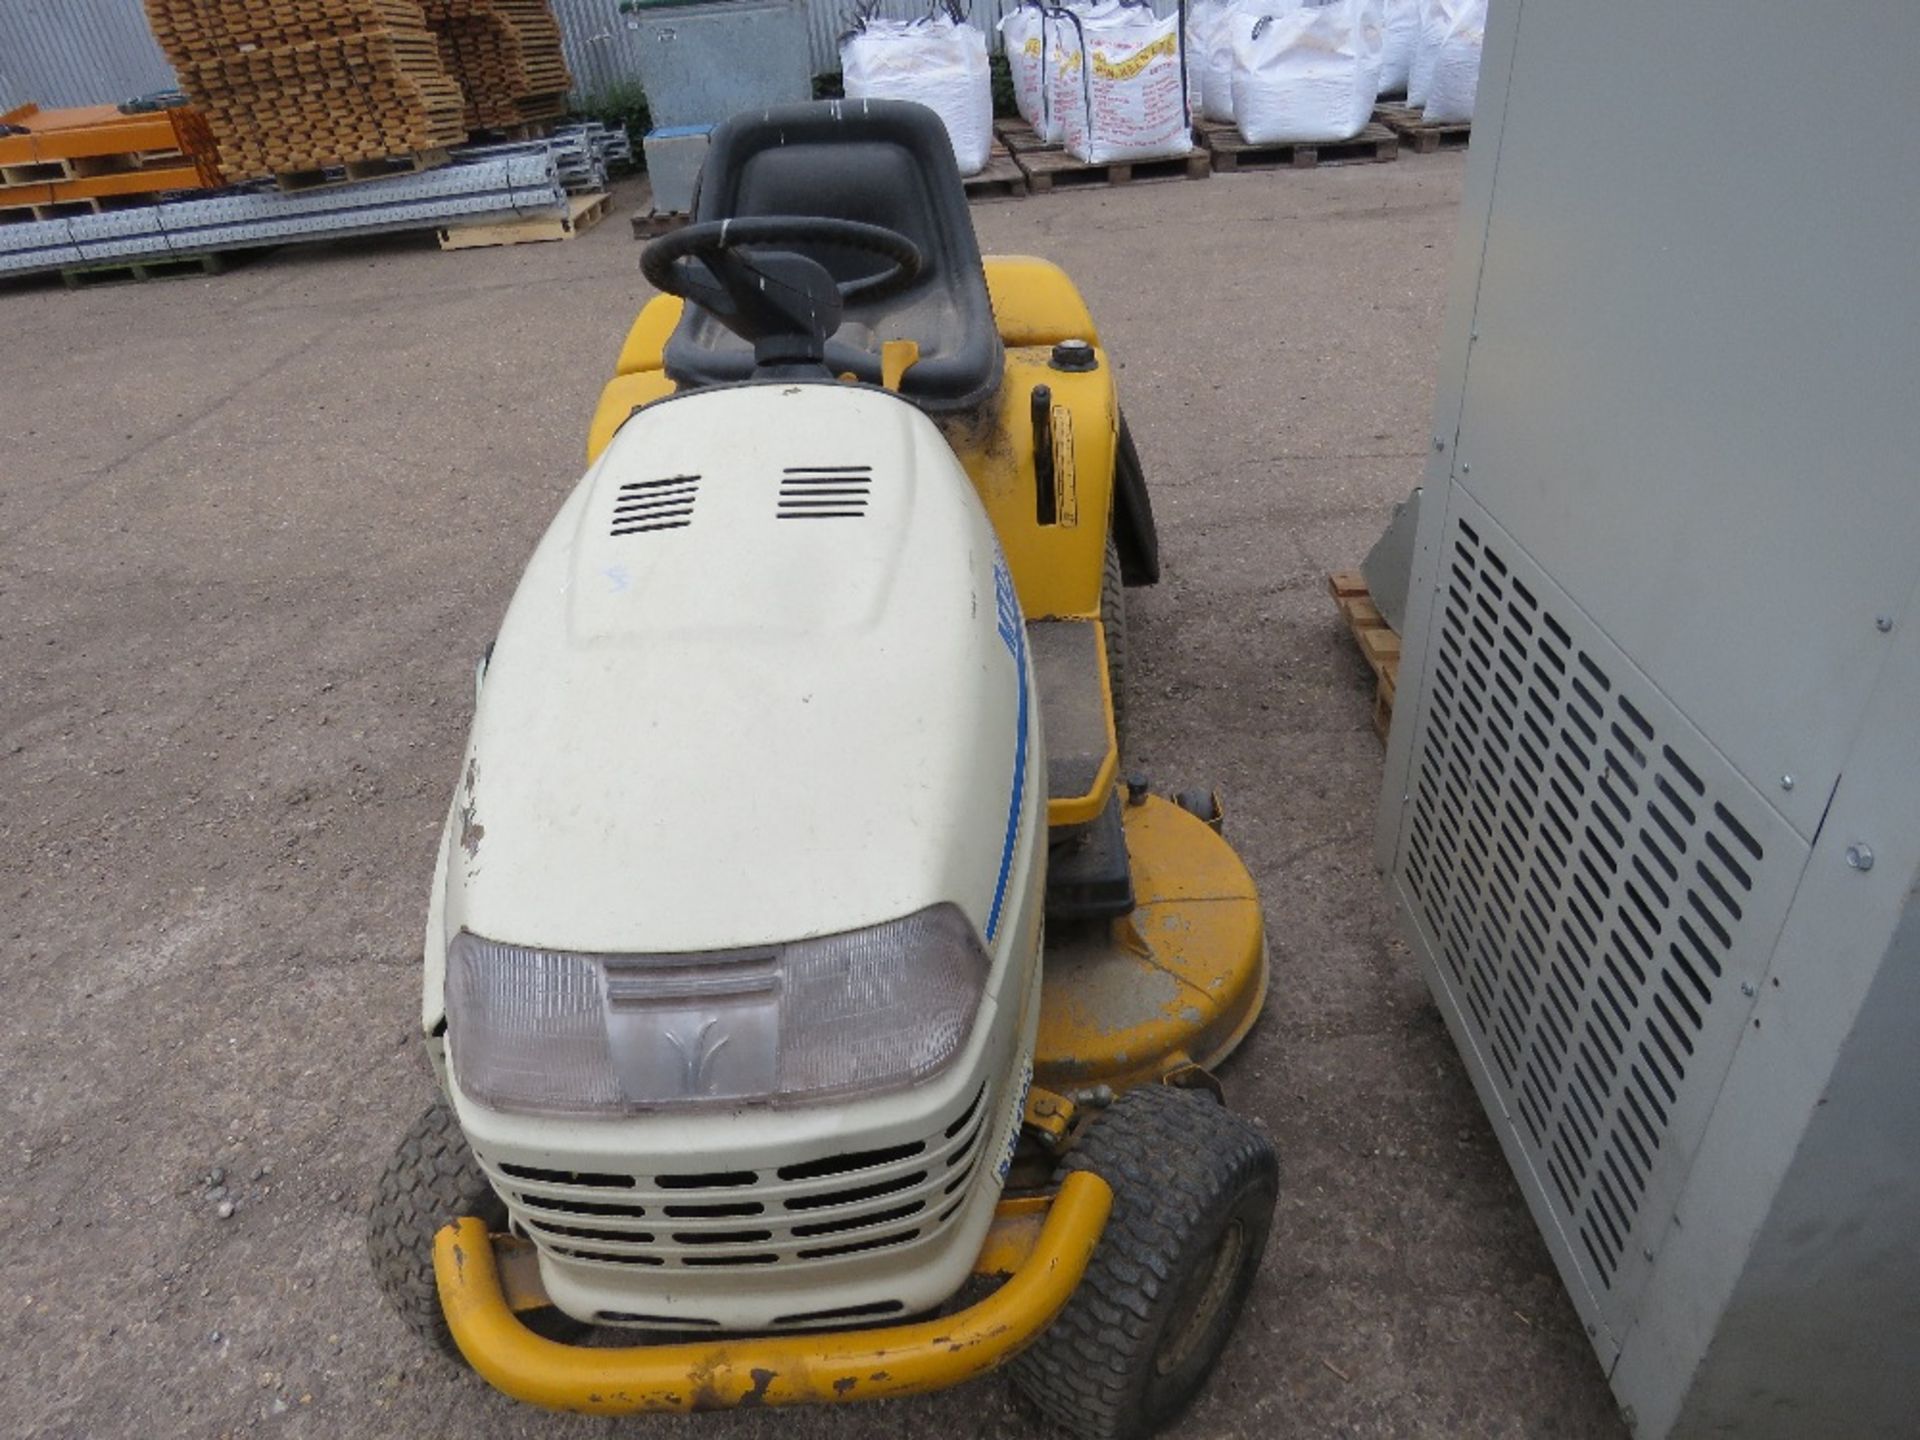 MTD CUB CADET PROFESSIONAL RIDE ON MOWER, PETROL ENGINED. BEEN IN STORAGE FOR SOME YEARS. NON RUNNER - Image 5 of 5